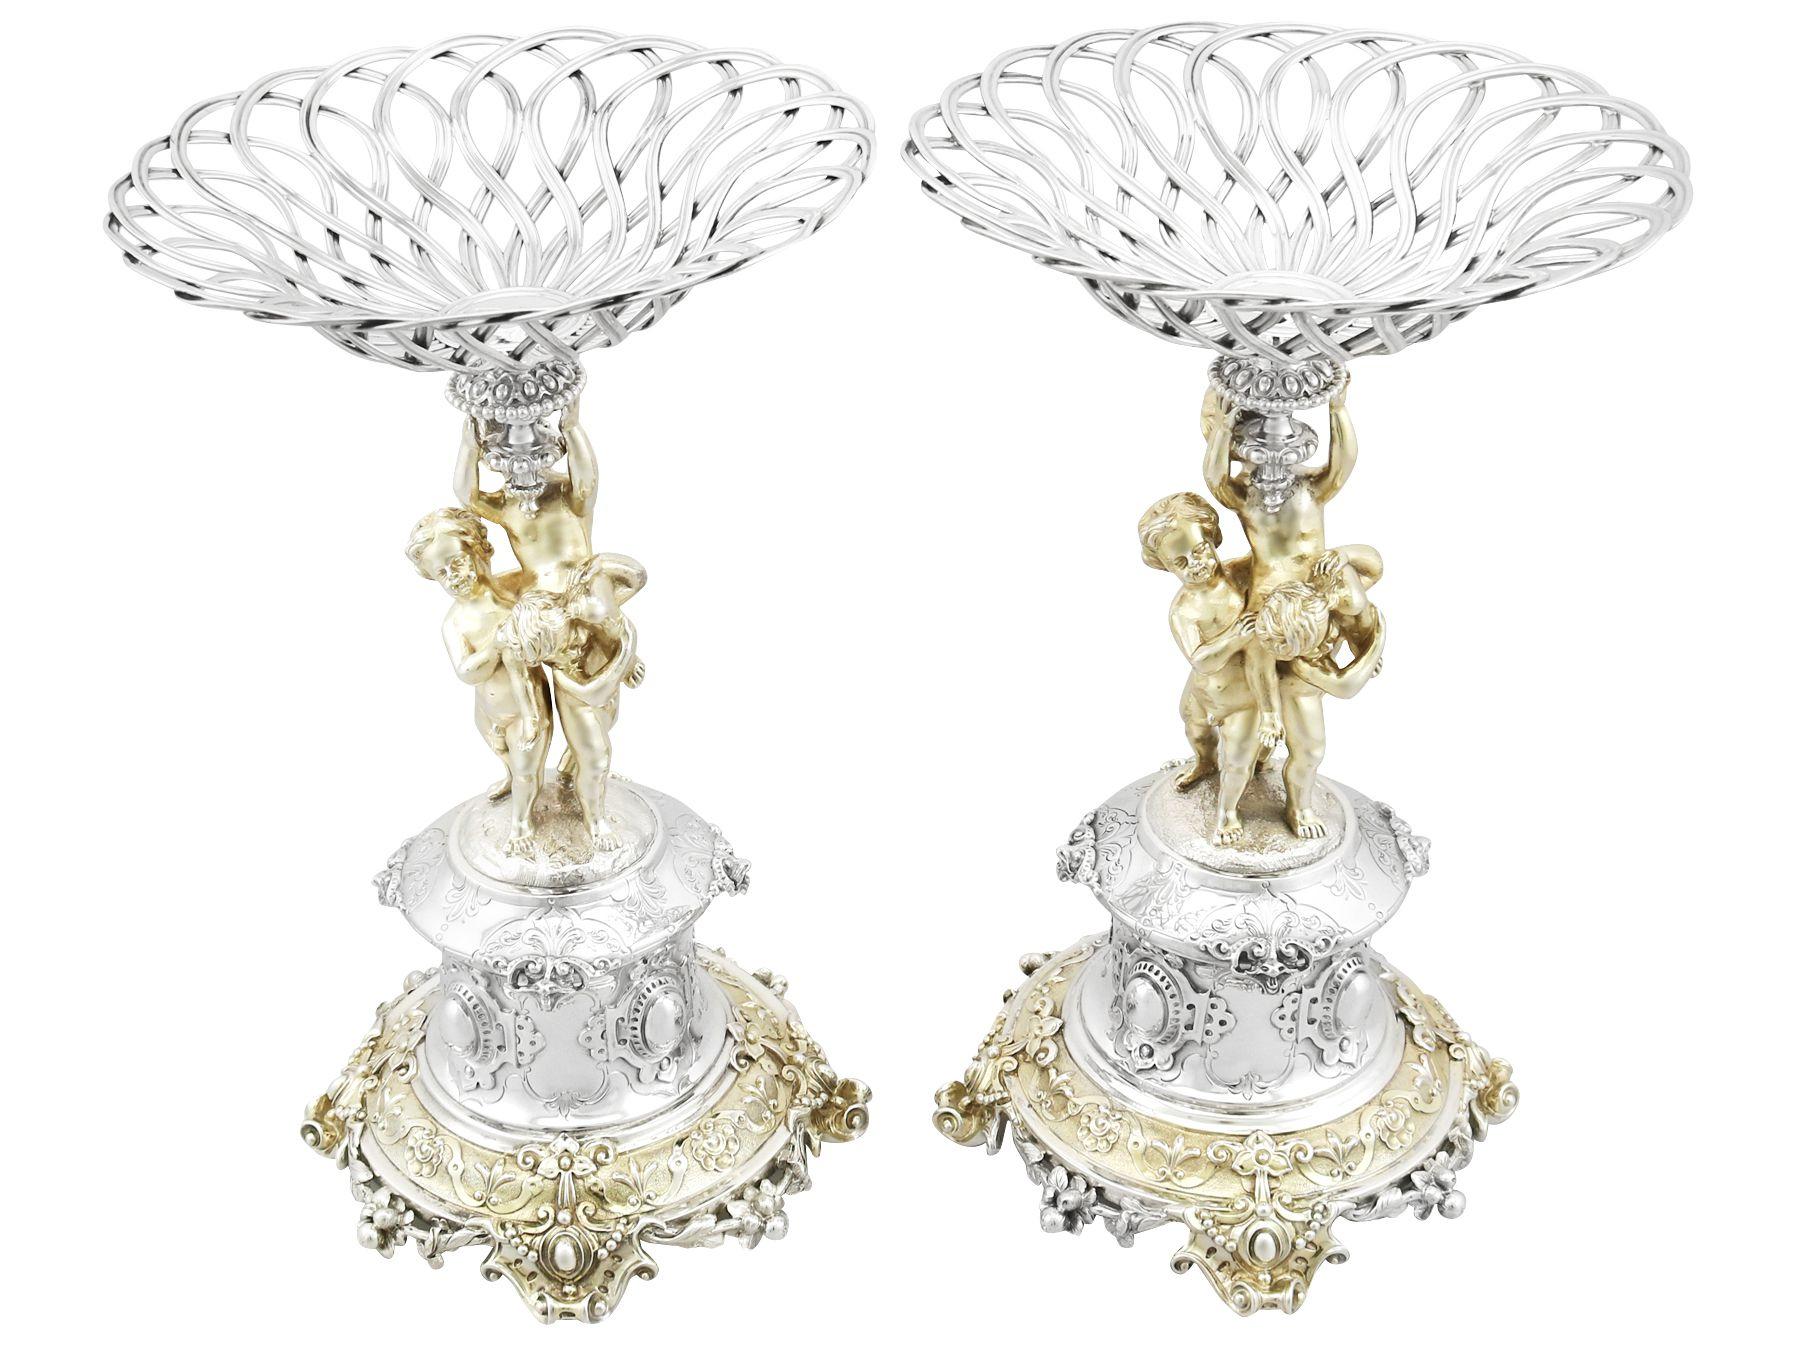 A magnificent, fine and impressive, pair of antique Victorian English sterling silver tazzas/centrepieces; an addition to our continental silverware collection.

These magnificent antique Victorian sterling silver tazzas or centrepieces have a